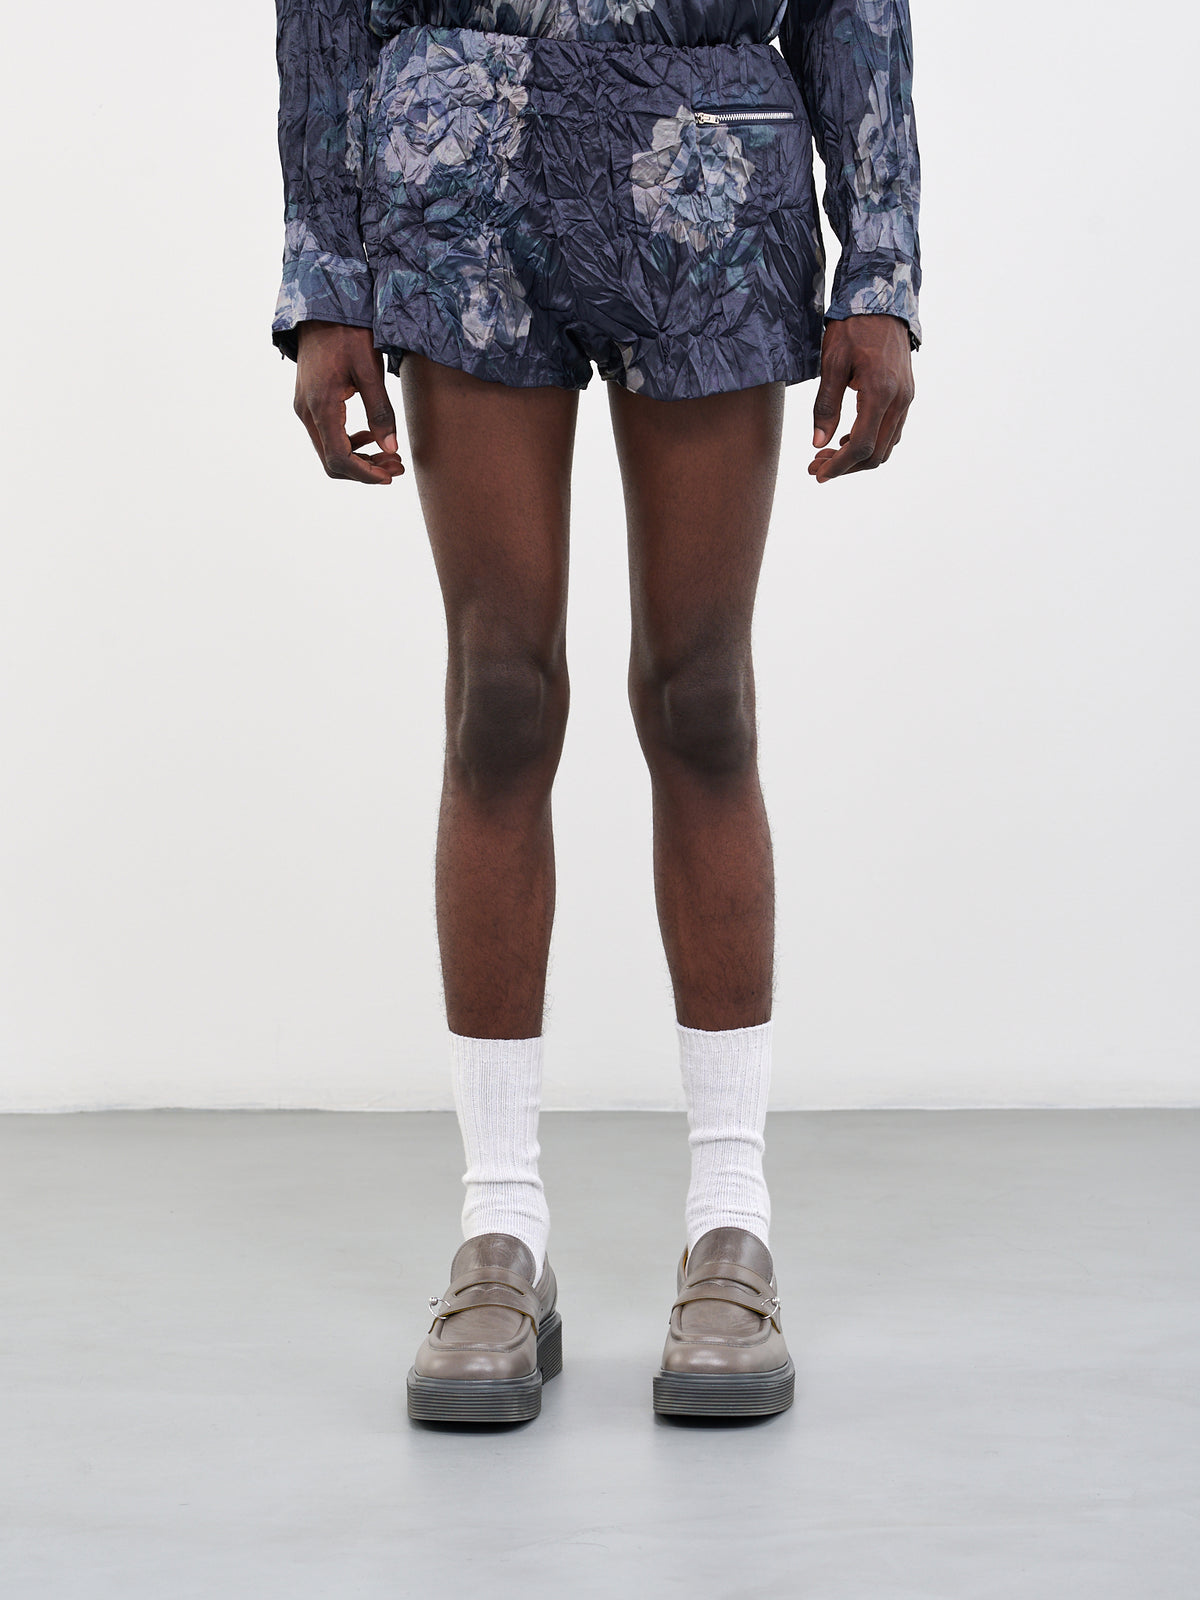 ACNE STUDIOS Crinkled Floral Shorts | H. Lorenzo - front